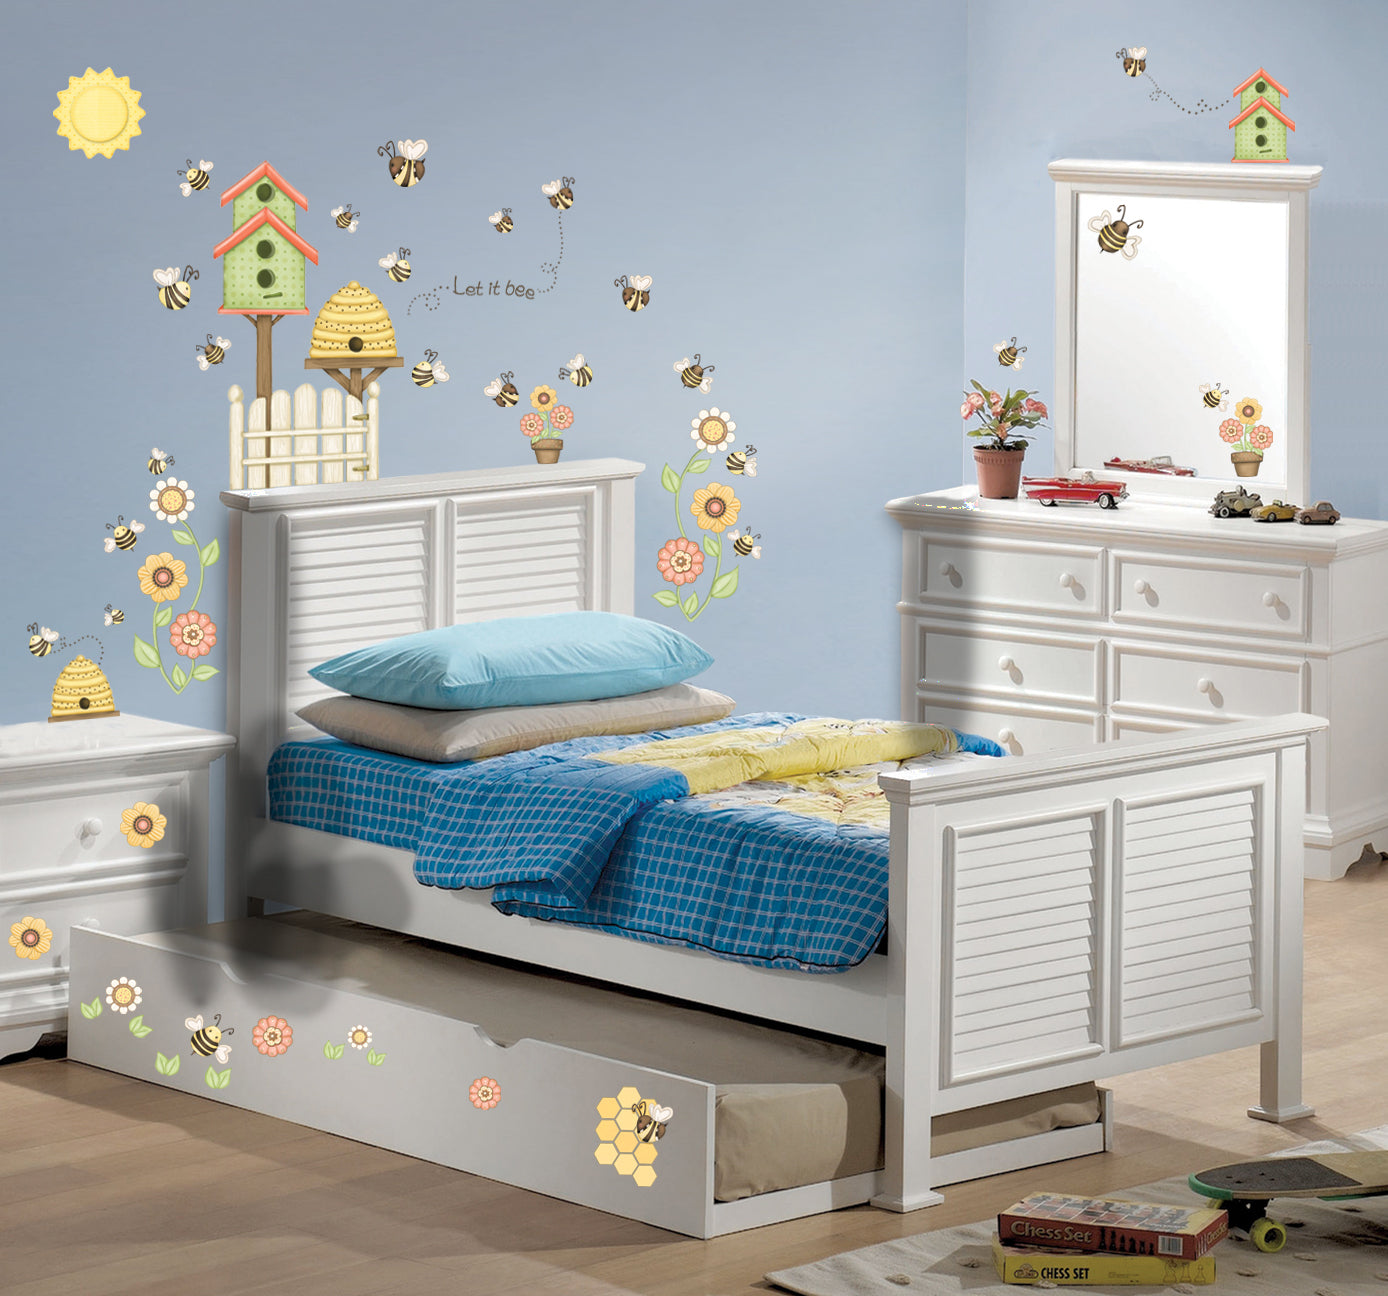 Let it Bee Happy Wall Decals